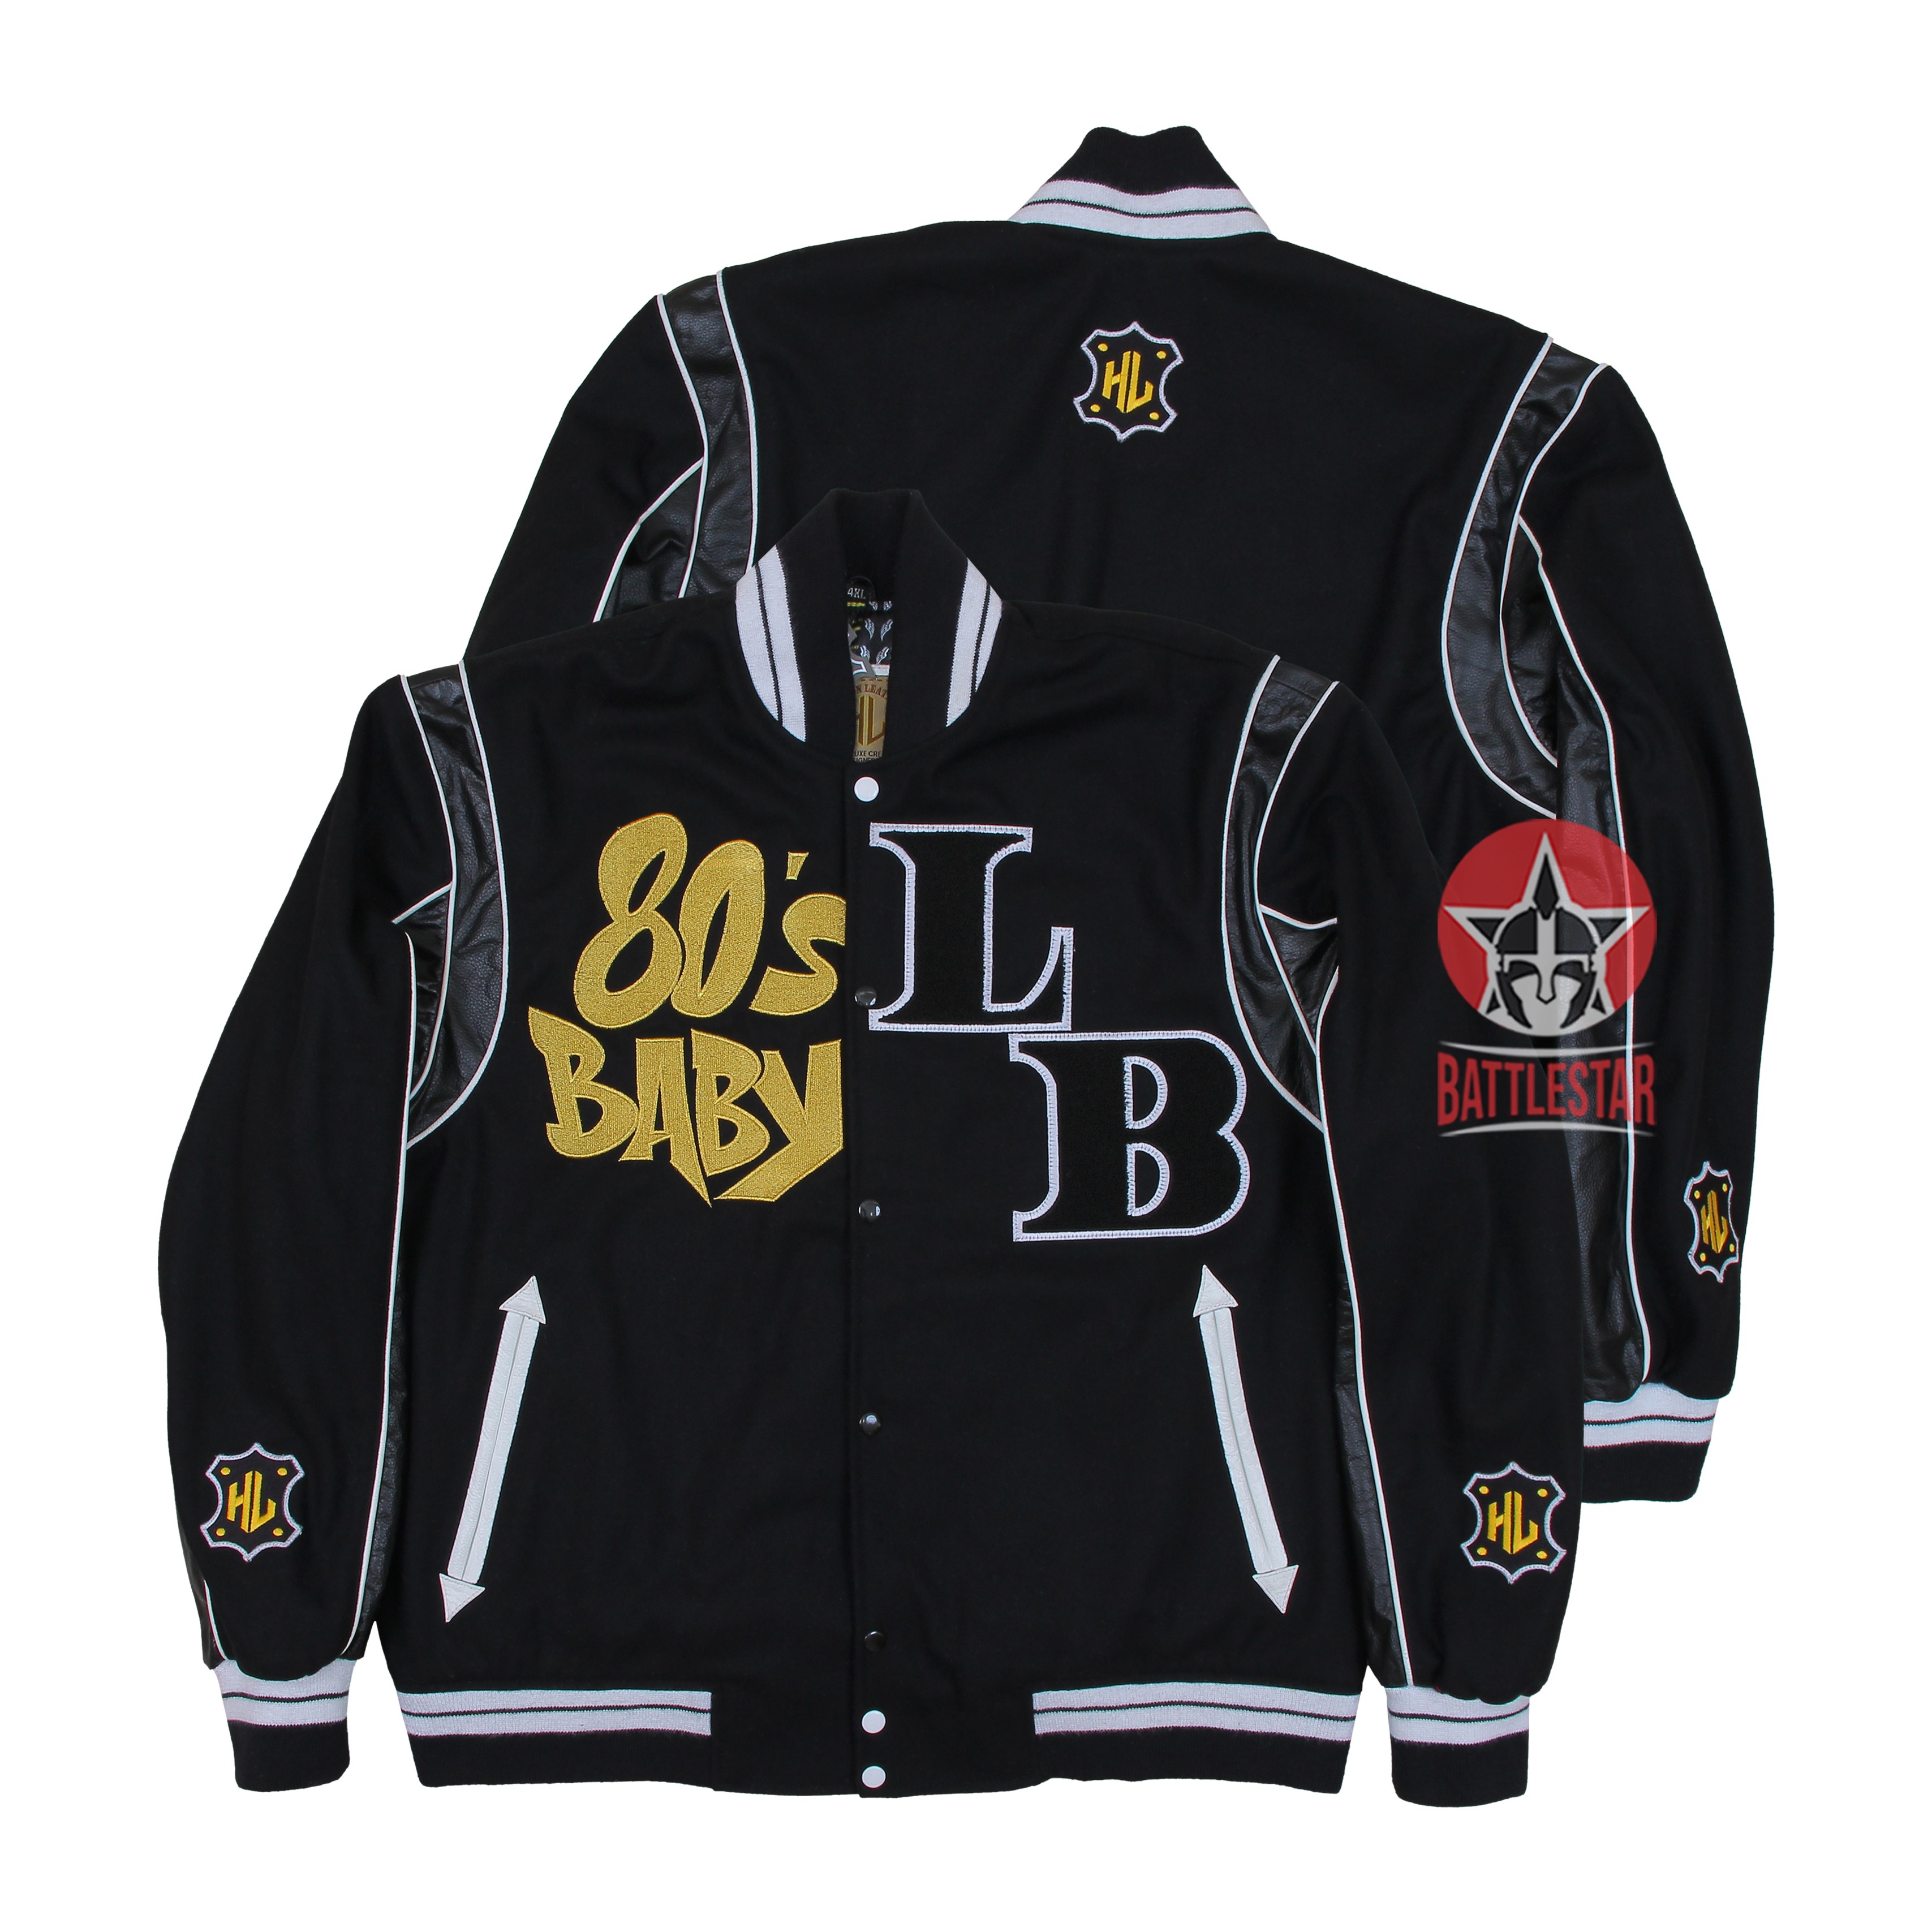 A Personalized Wool & Leather 80's Baby Letterman Varsity Jacket